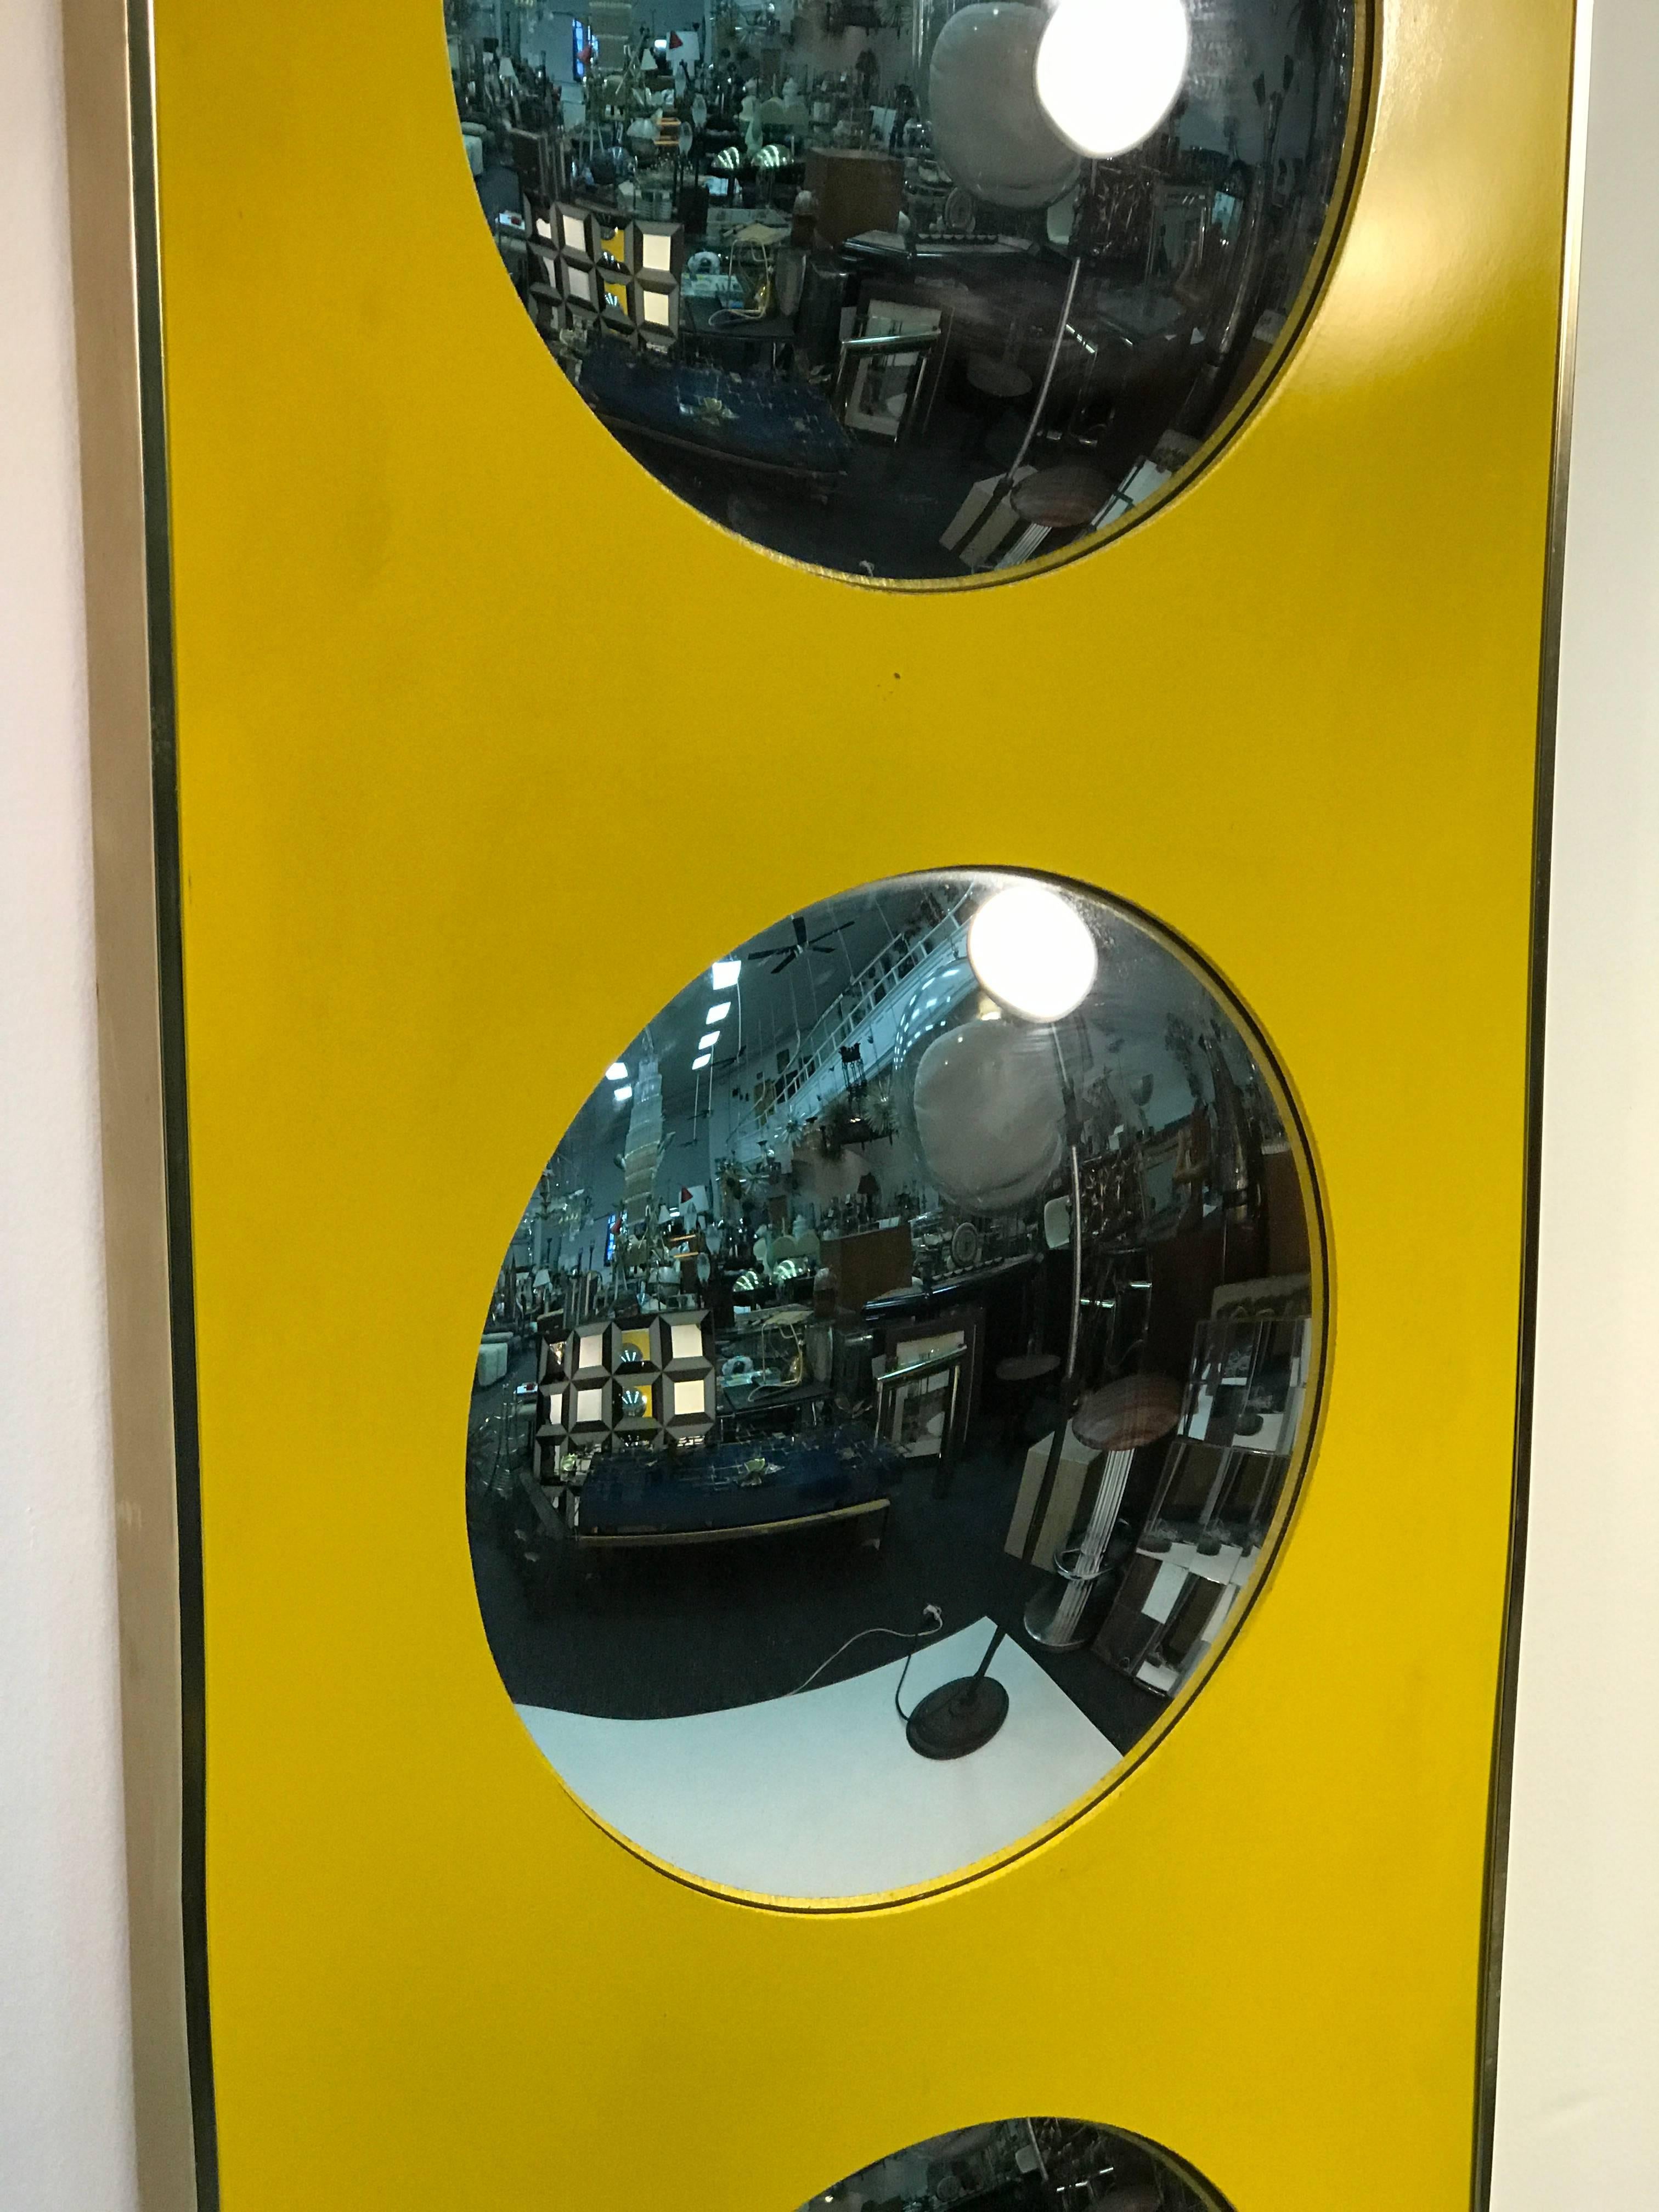 An iconic Pop Art bubble framed mirror or wall-mounted sculpture by Turner, circa 1980. Good vintage condition with age appropriate wear.